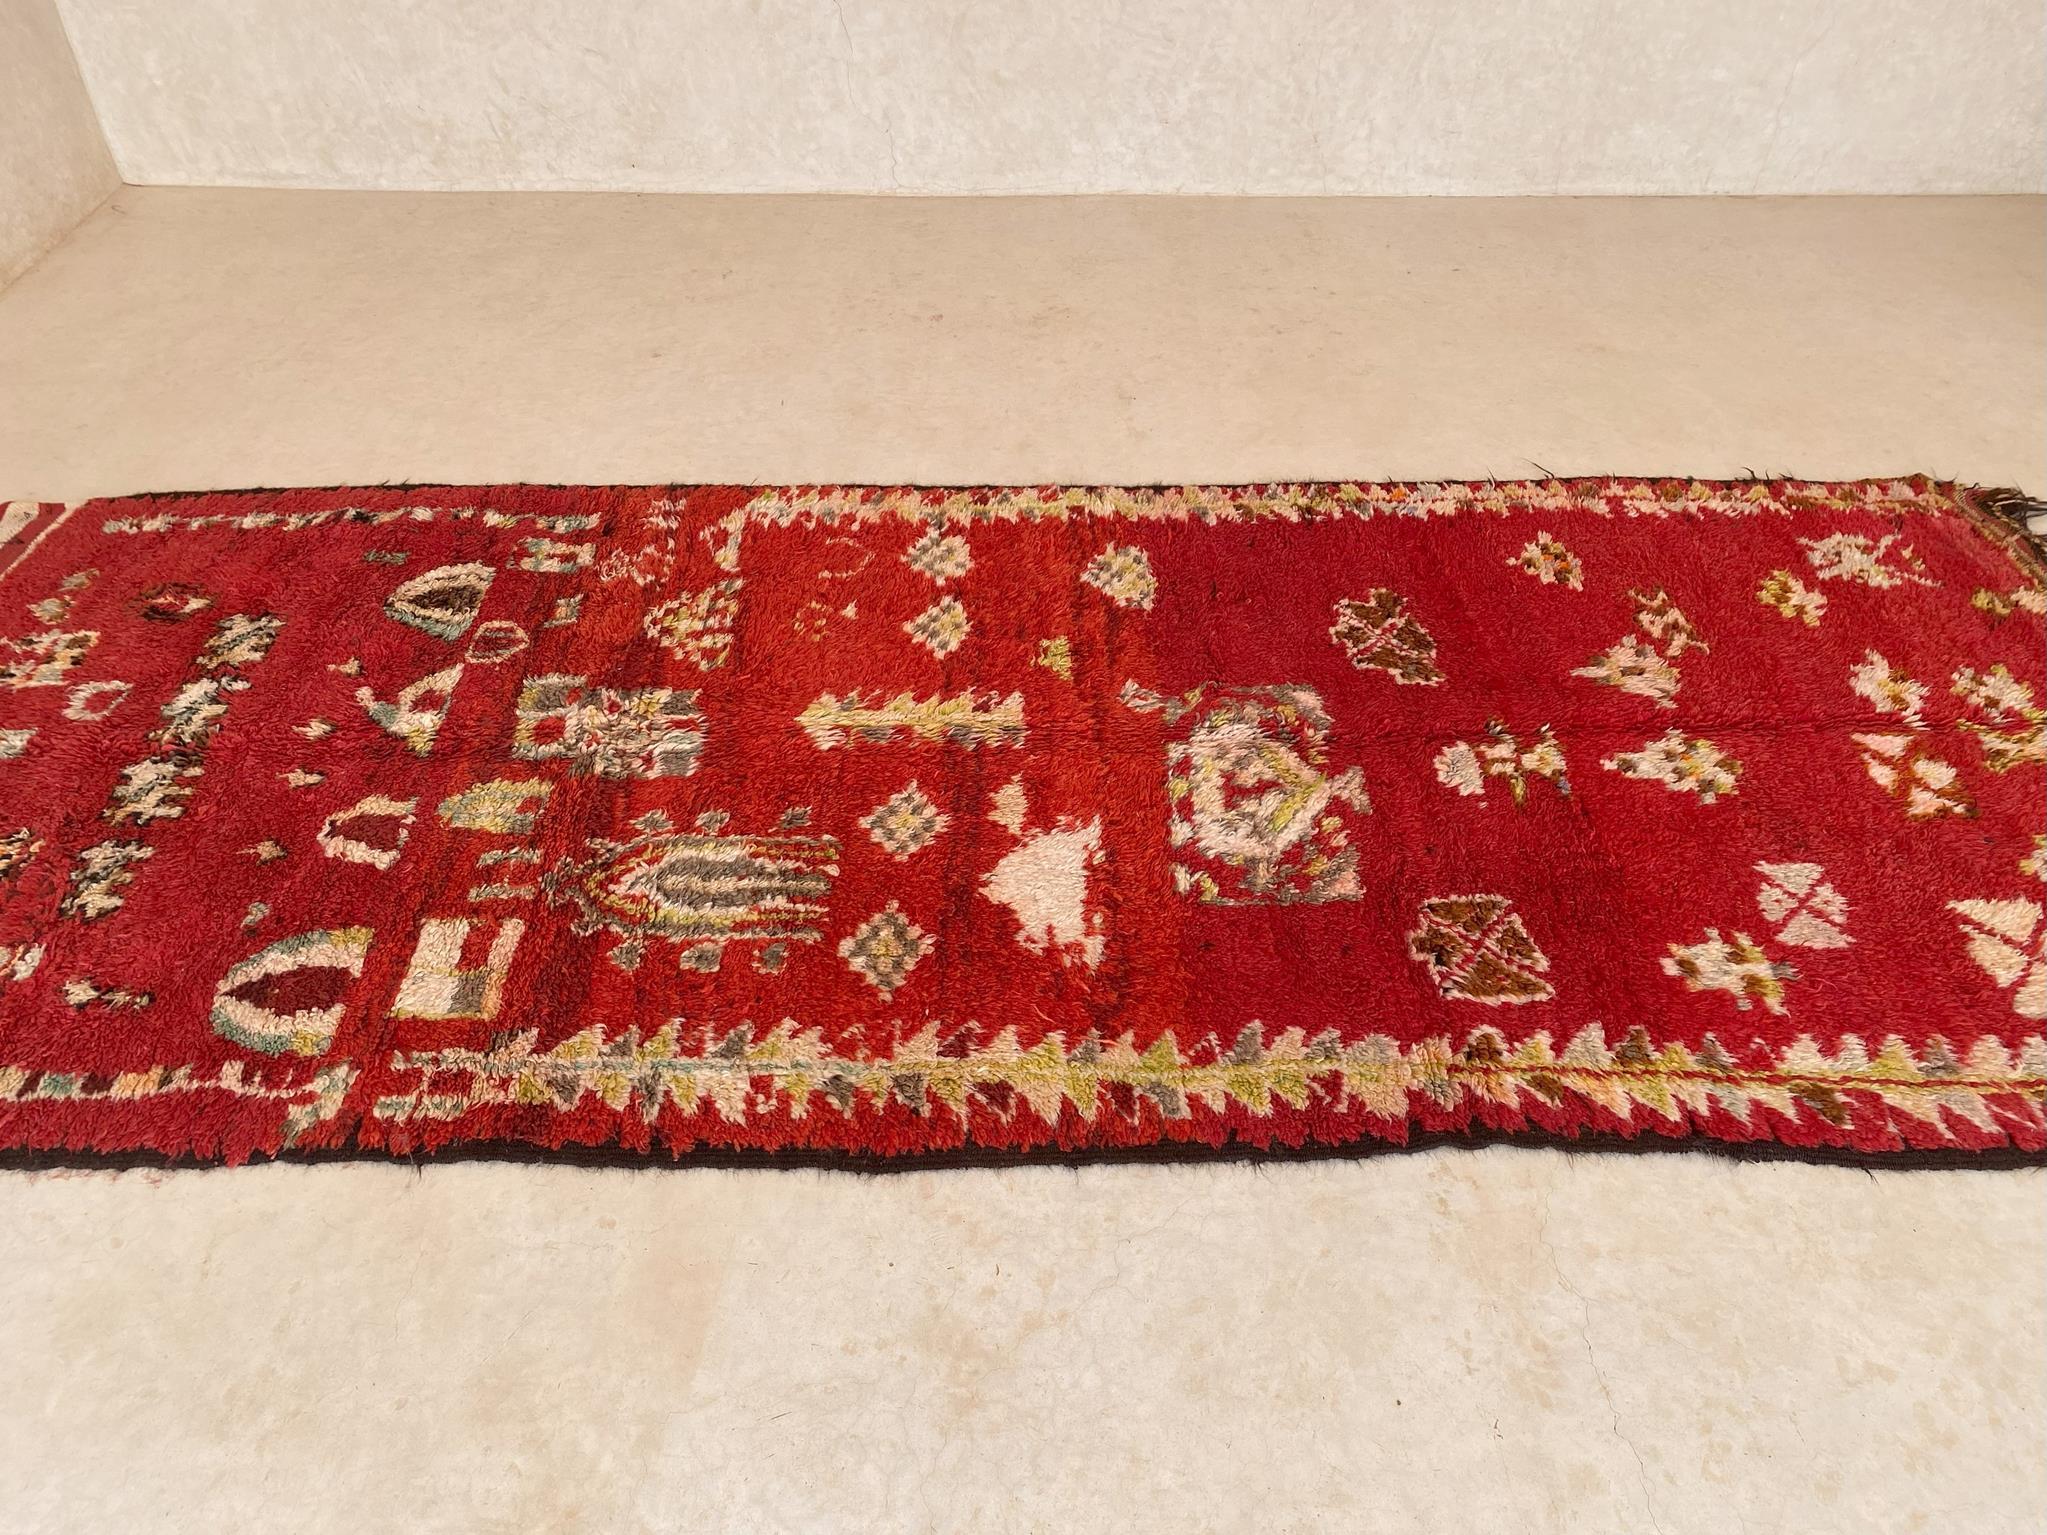 Hand-Woven Vintage Moroccan Rehamna rug - Red - 5.1x12.5feet / 156x382cm For Sale